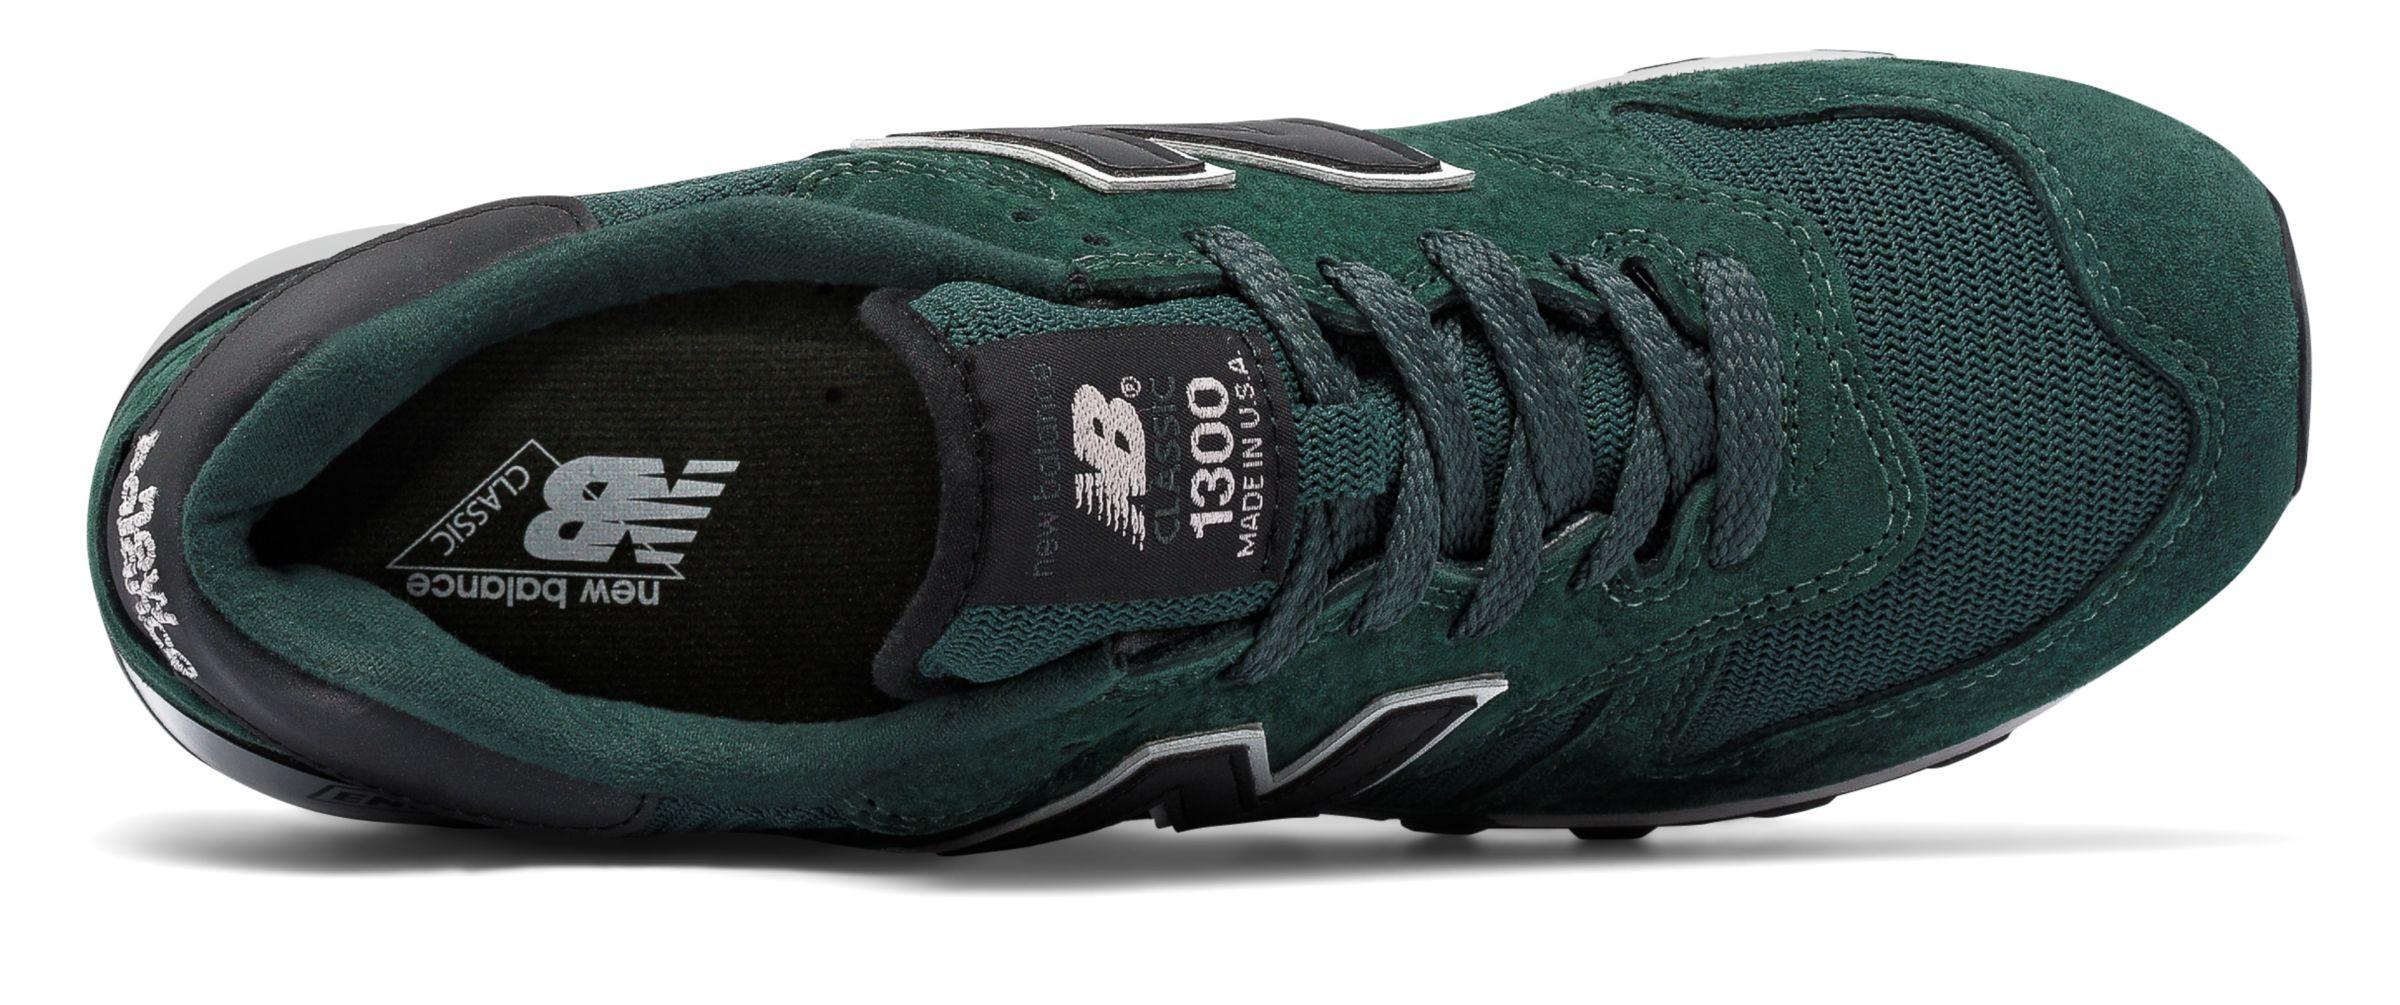 New Balance Leather 1300 in Green for 